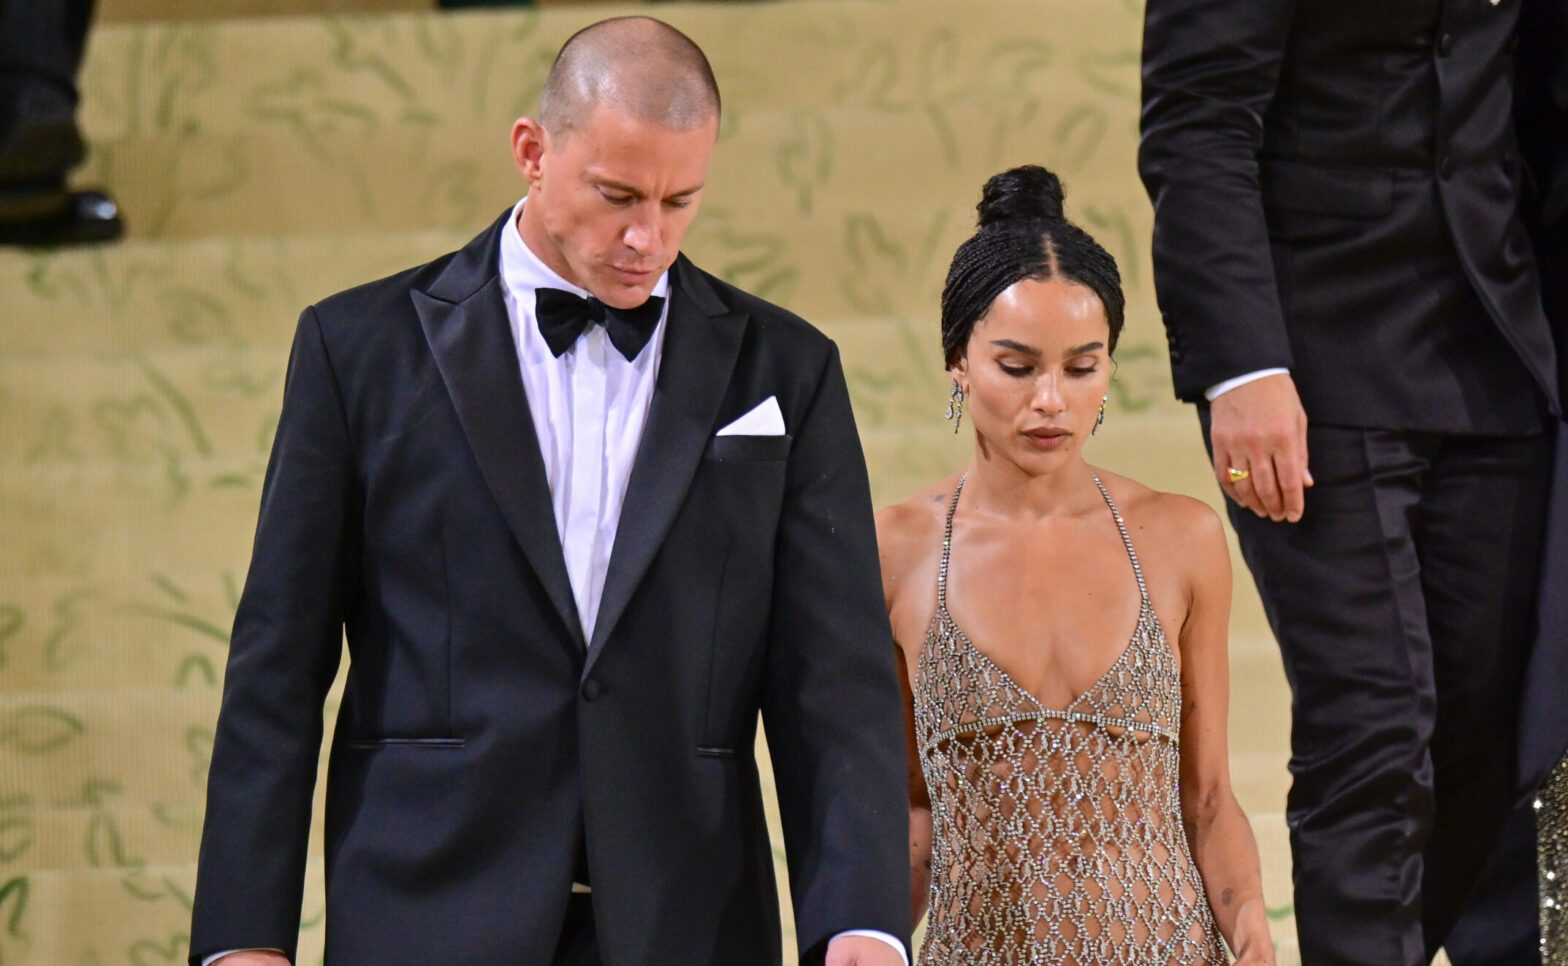 Zoe Kravitz and Channing Tatum have been together for over two years and are recently engaged. Here's a timeline of their relationship. Pictured: A photo of Zoe and Channing at the 2021 Met Gala